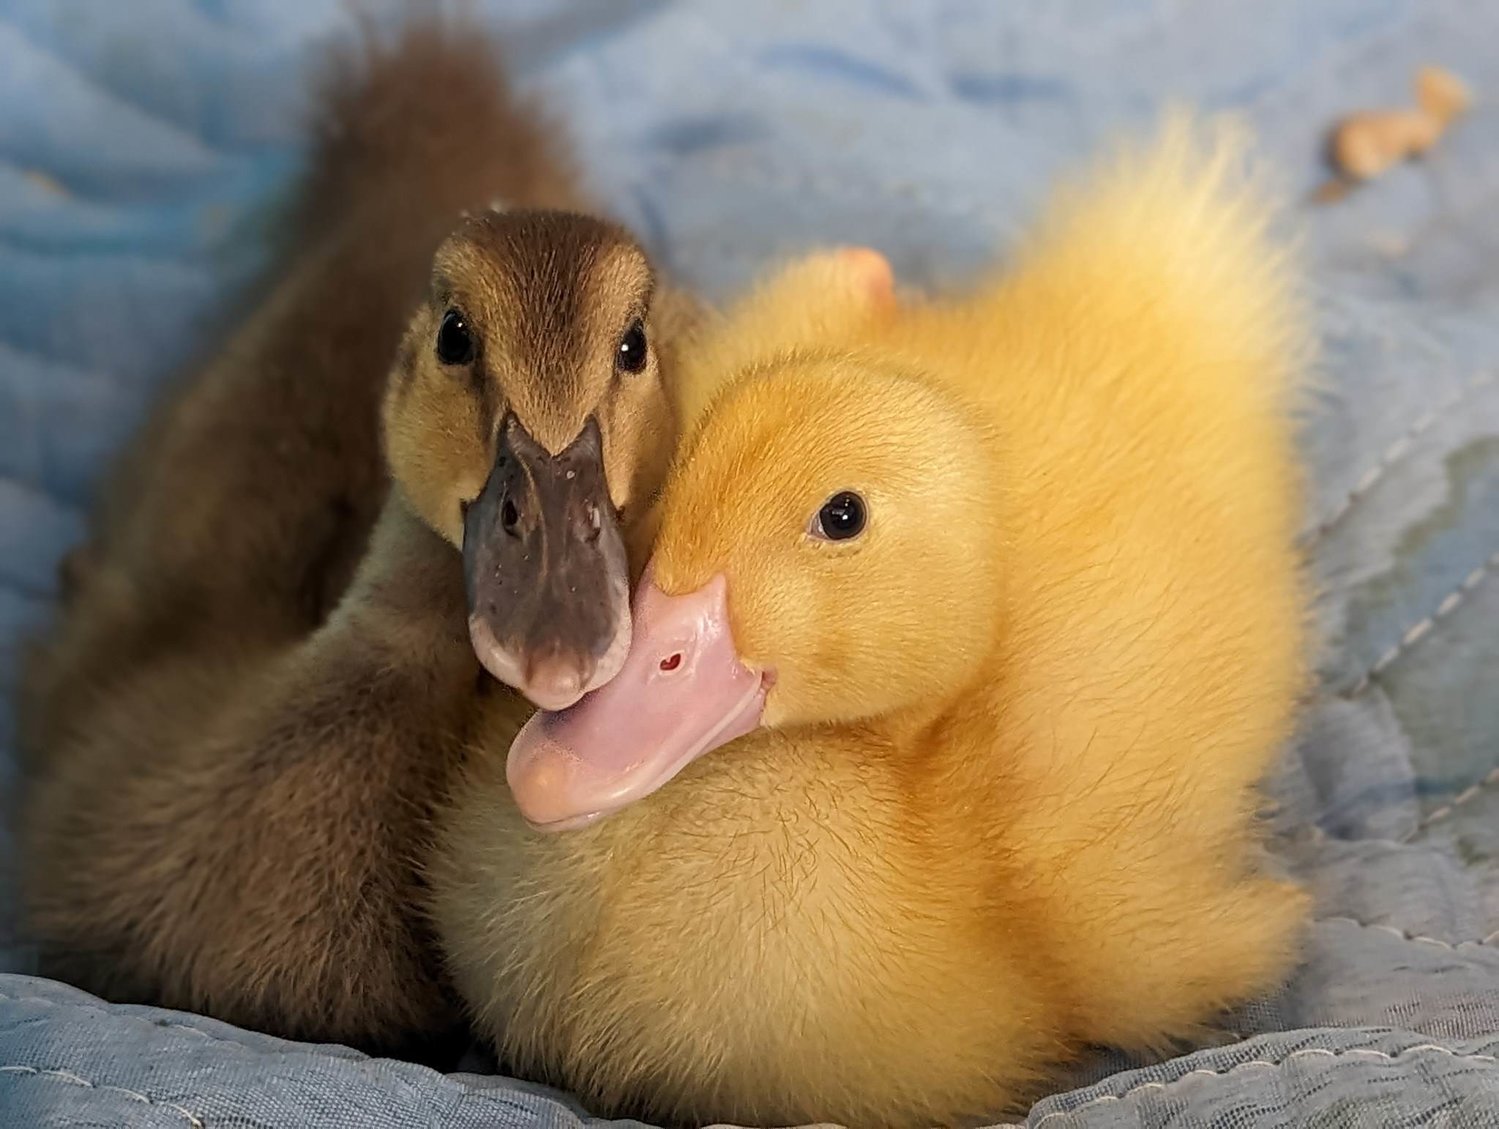 Mail-order chicks and ducklings are illegal to ship in quantities fewer than six in New York, but two ducklings were found delivered to a house in Valley Stream.